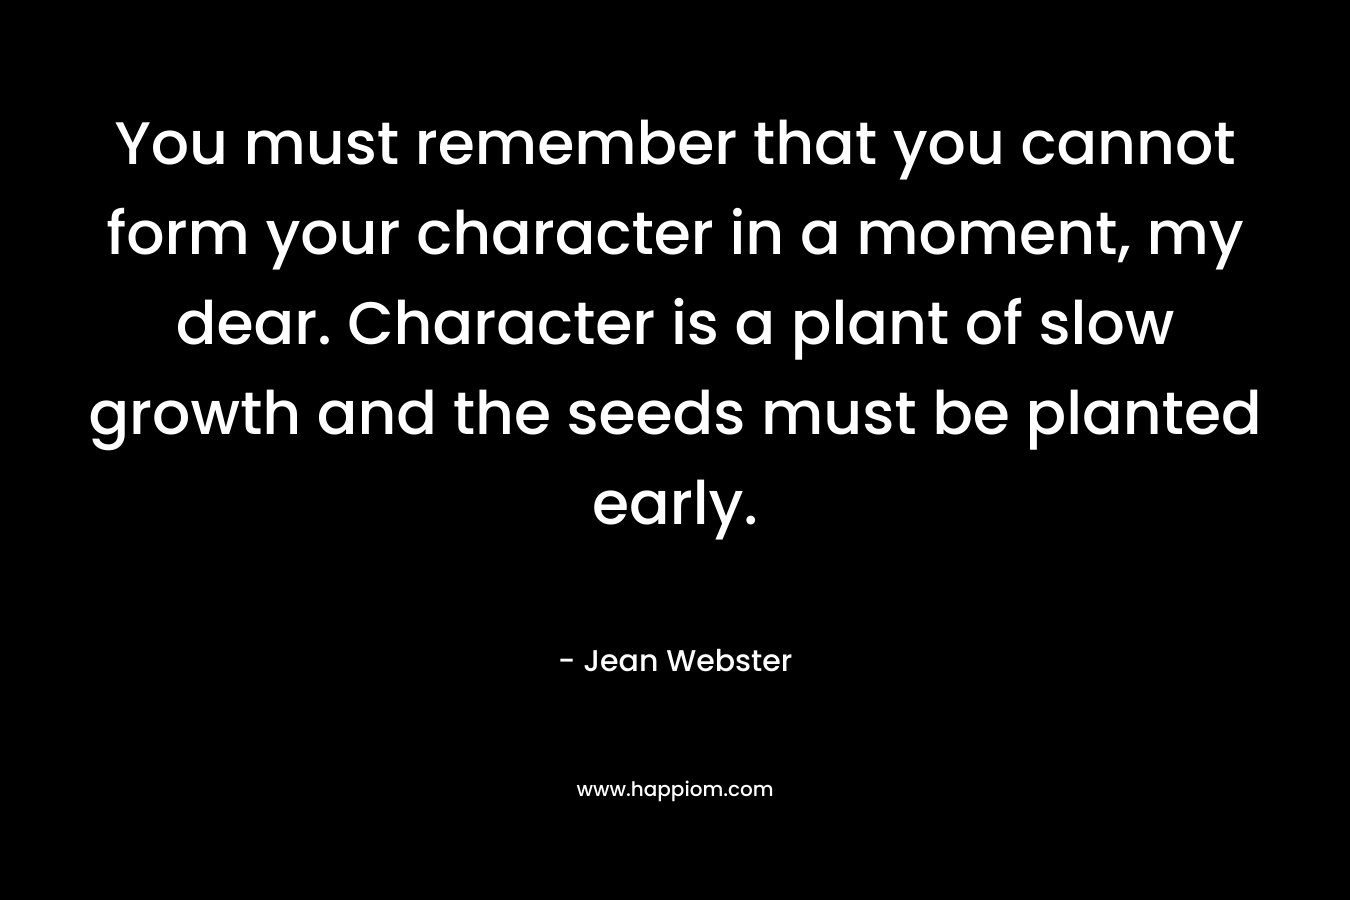 You must remember that you cannot form your character in a moment, my dear. Character is a plant of slow growth and the seeds must be planted early.